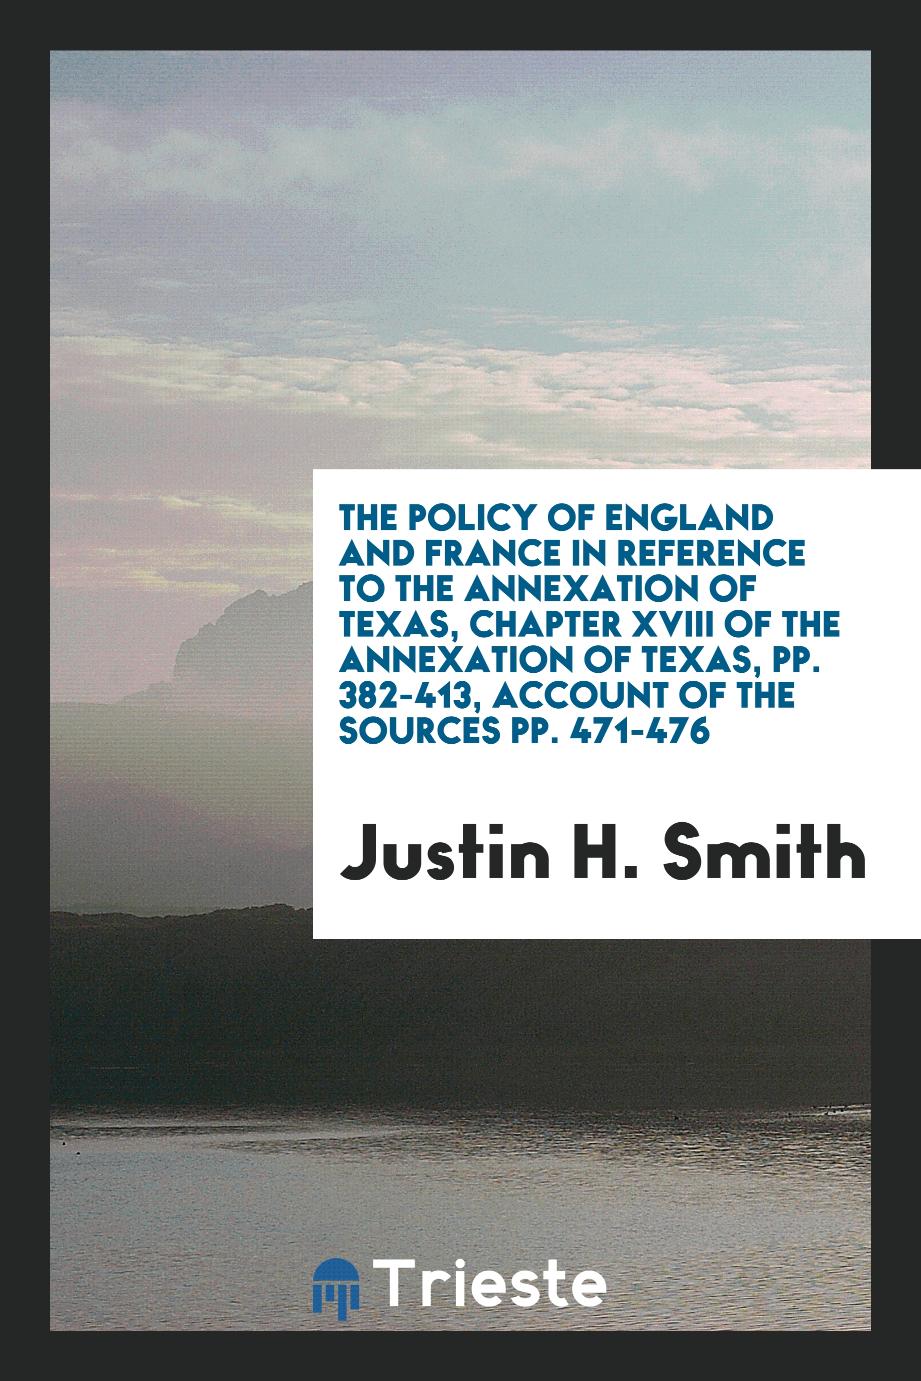 The Policy of England and France in Reference to the Annexation of Texas, Chapter XVIII of the Annexation of Texas, pp. 382-413, Account of the sources pp. 471-476